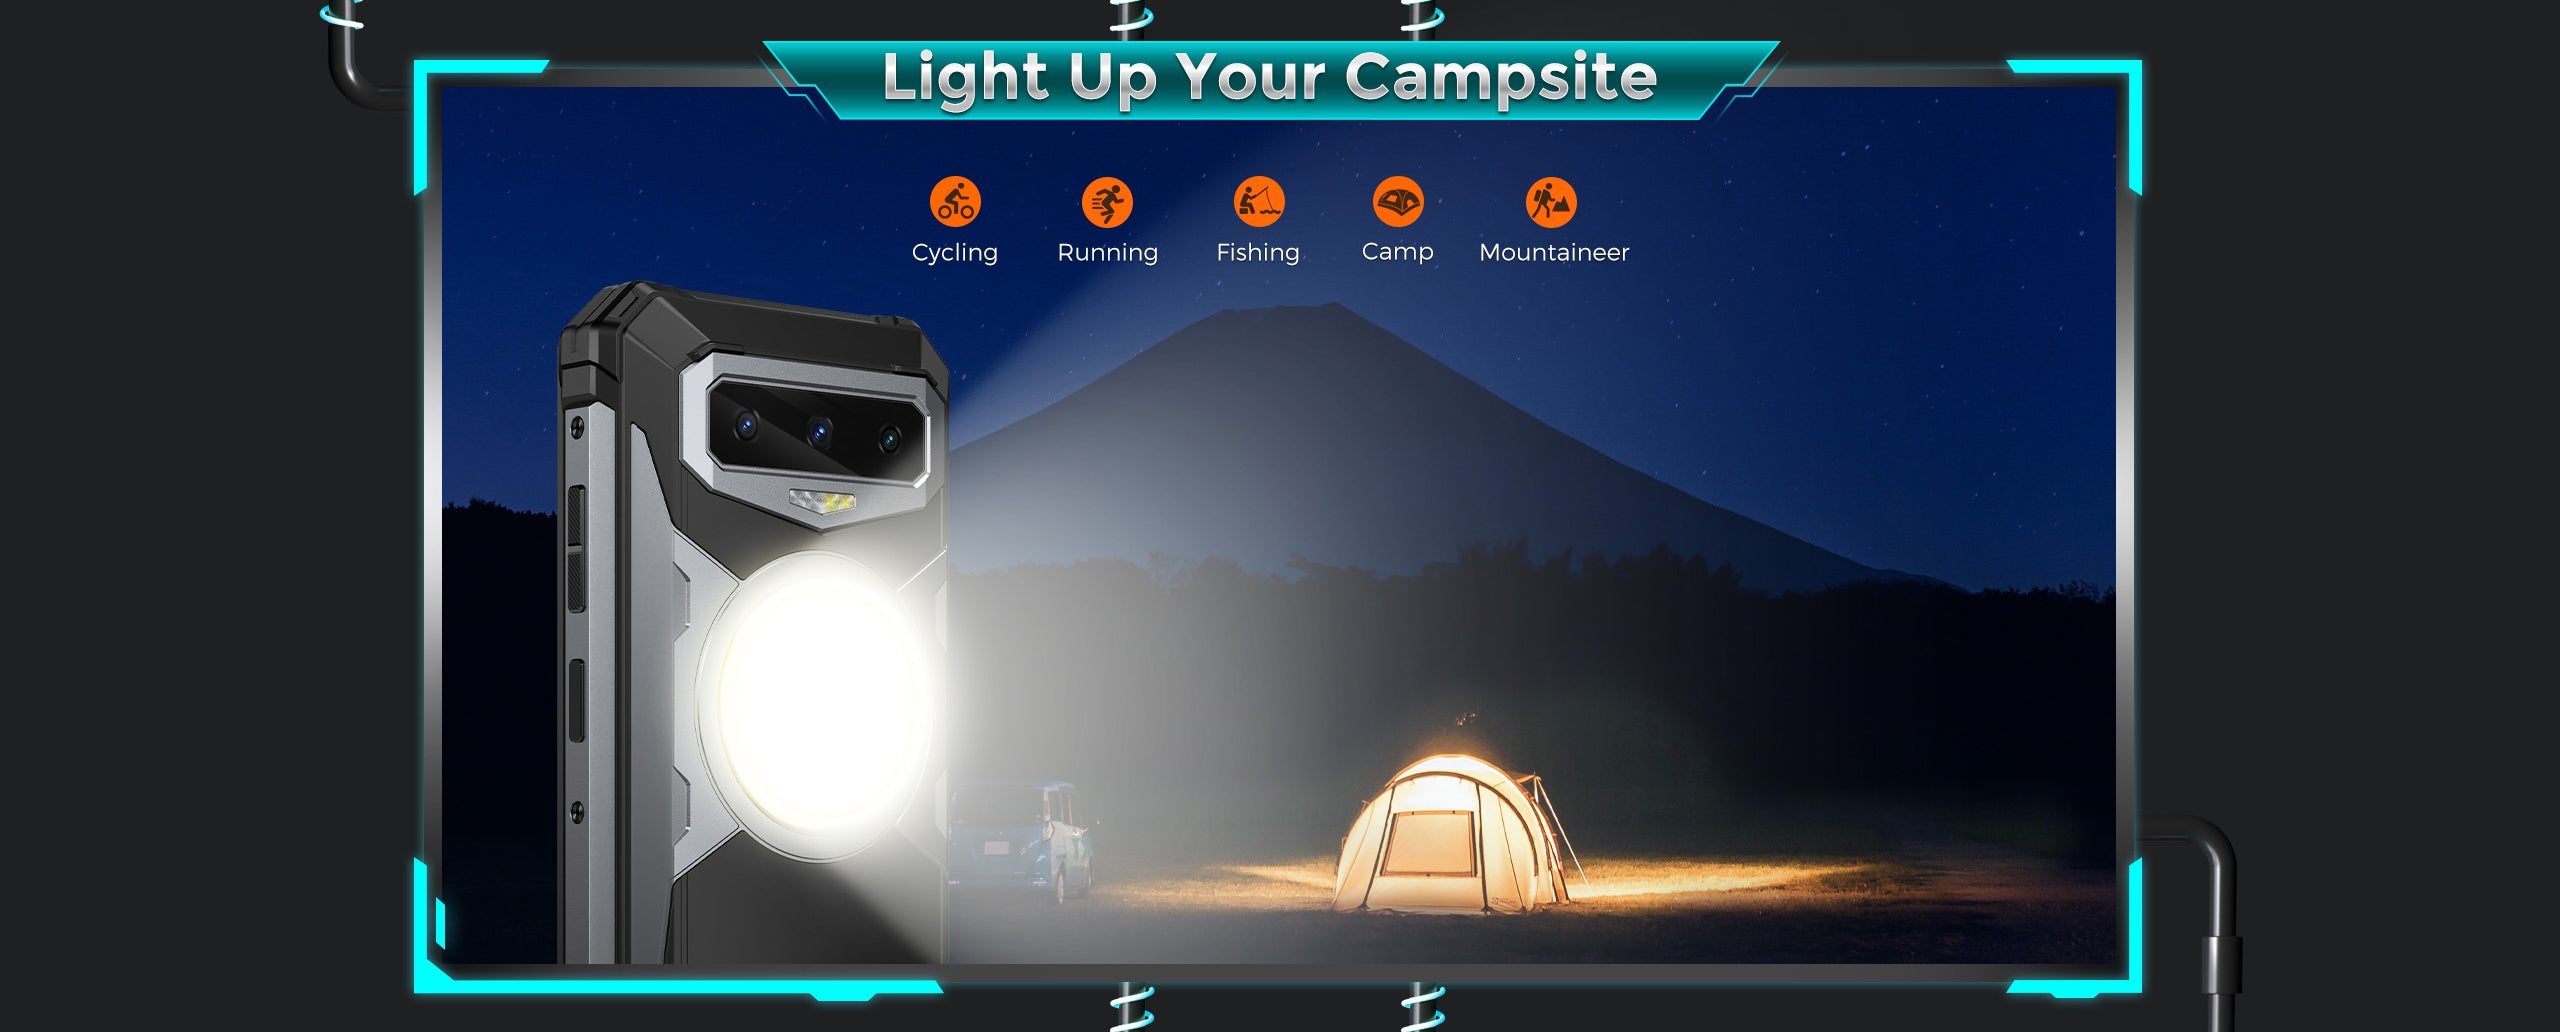 Light Up Your Campsite